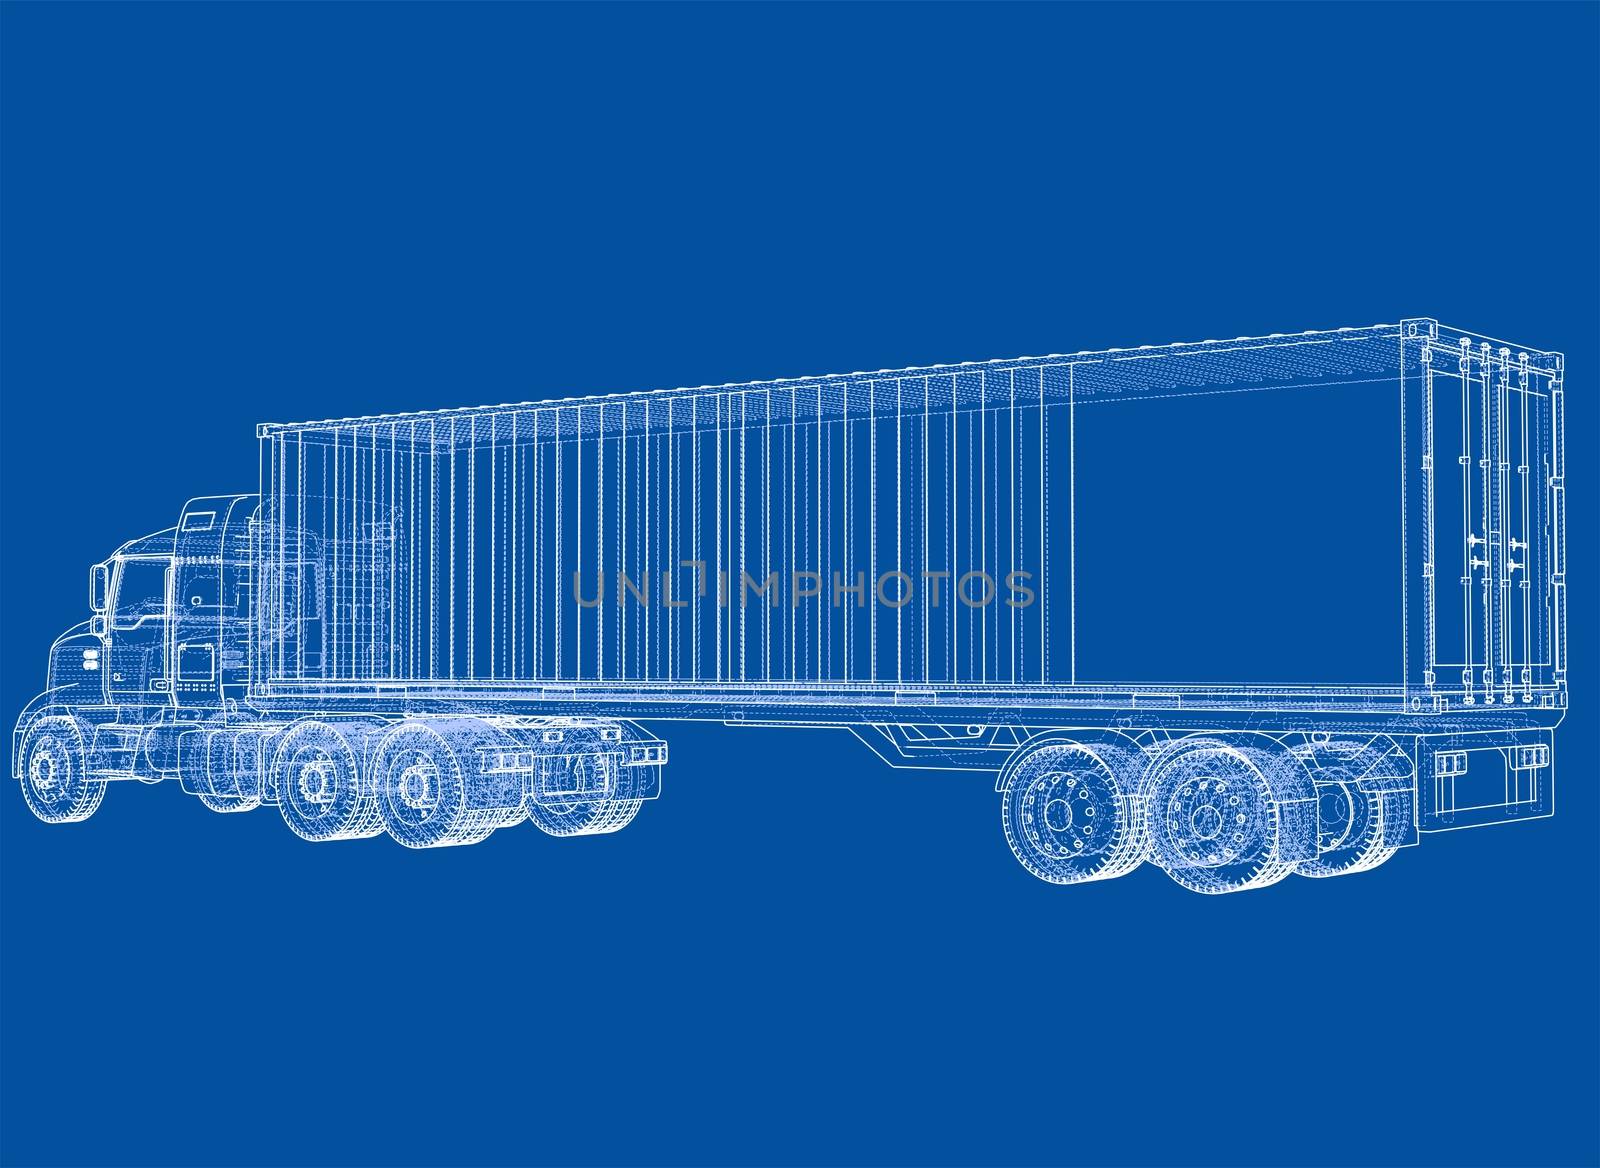 Truck with semitrailer. Wire-frame style. 3d illustration